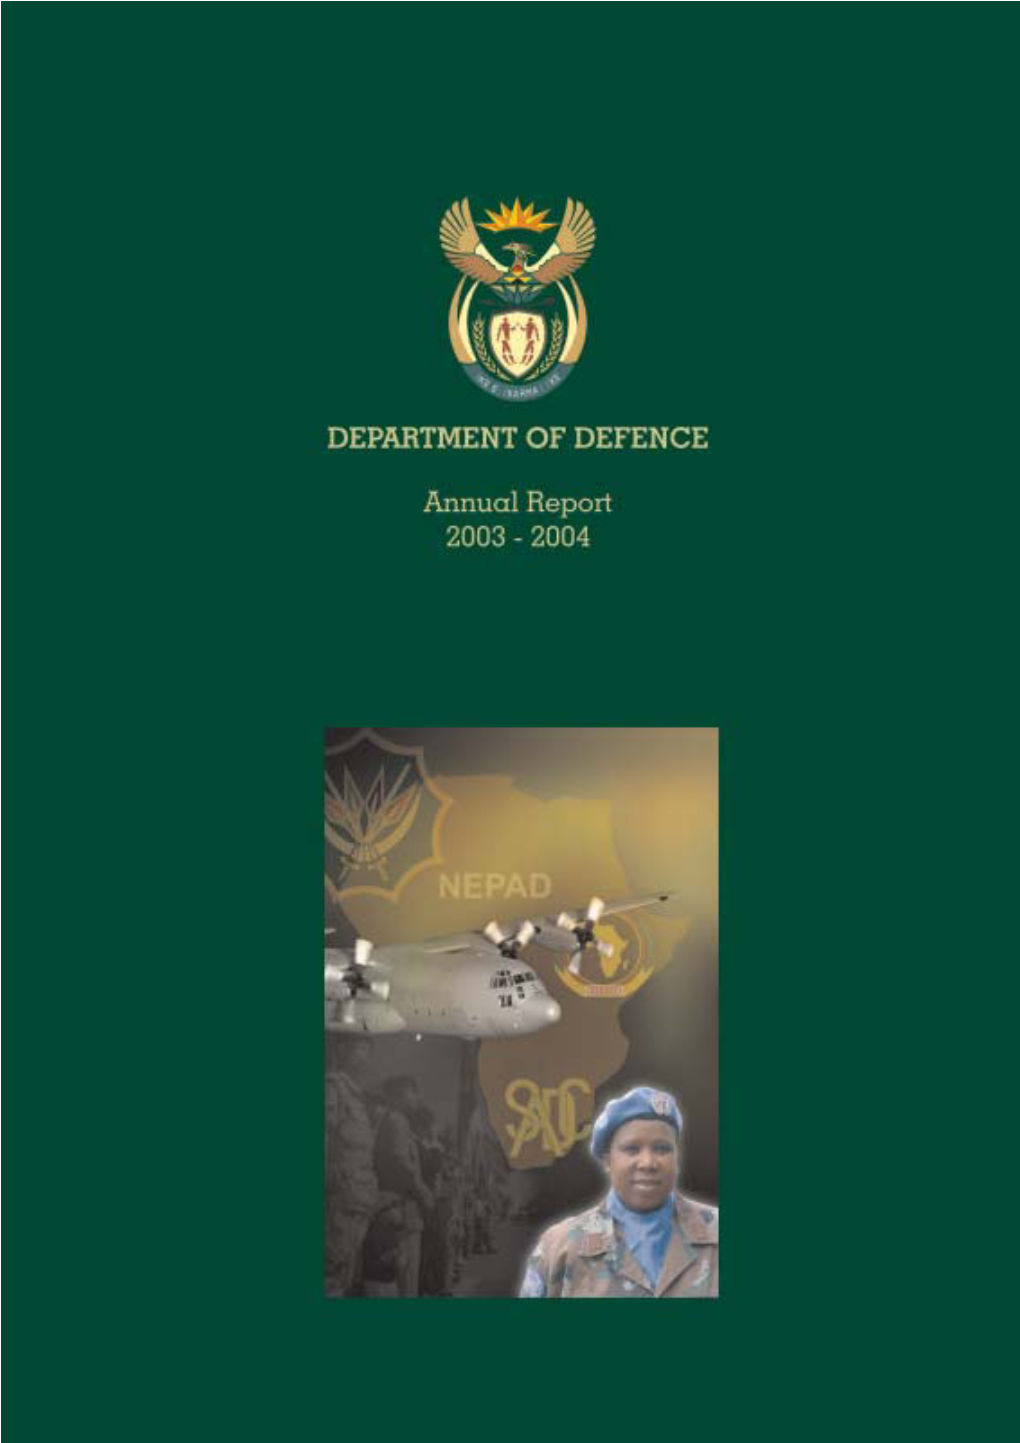 Department of Defence Annual Report 2003/2004